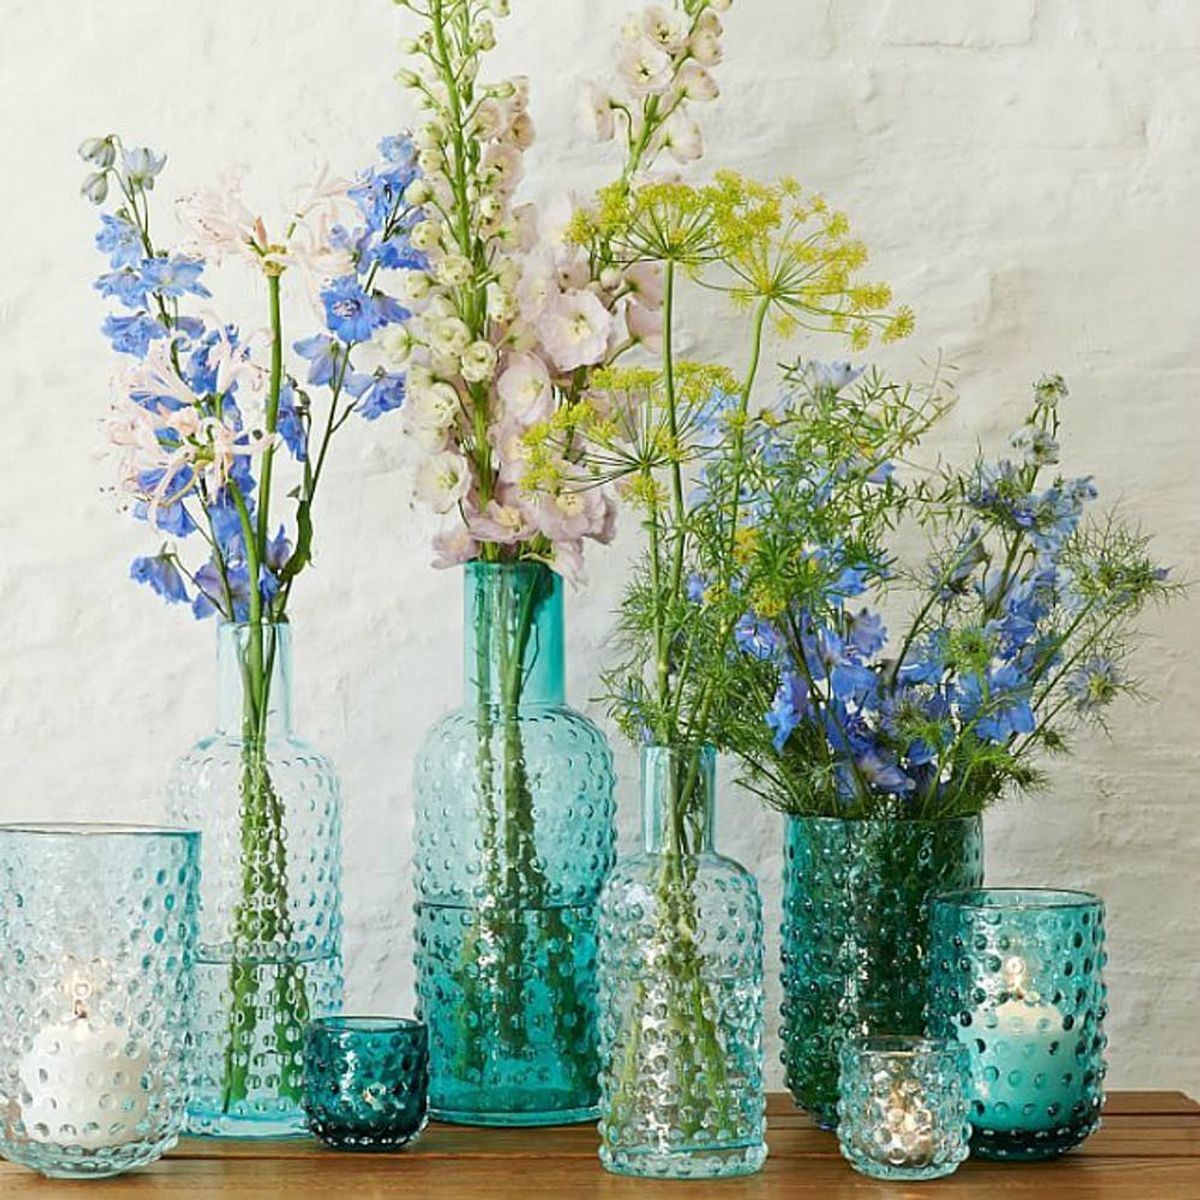 13 Colorful Vases Perfect for Spring Flowers